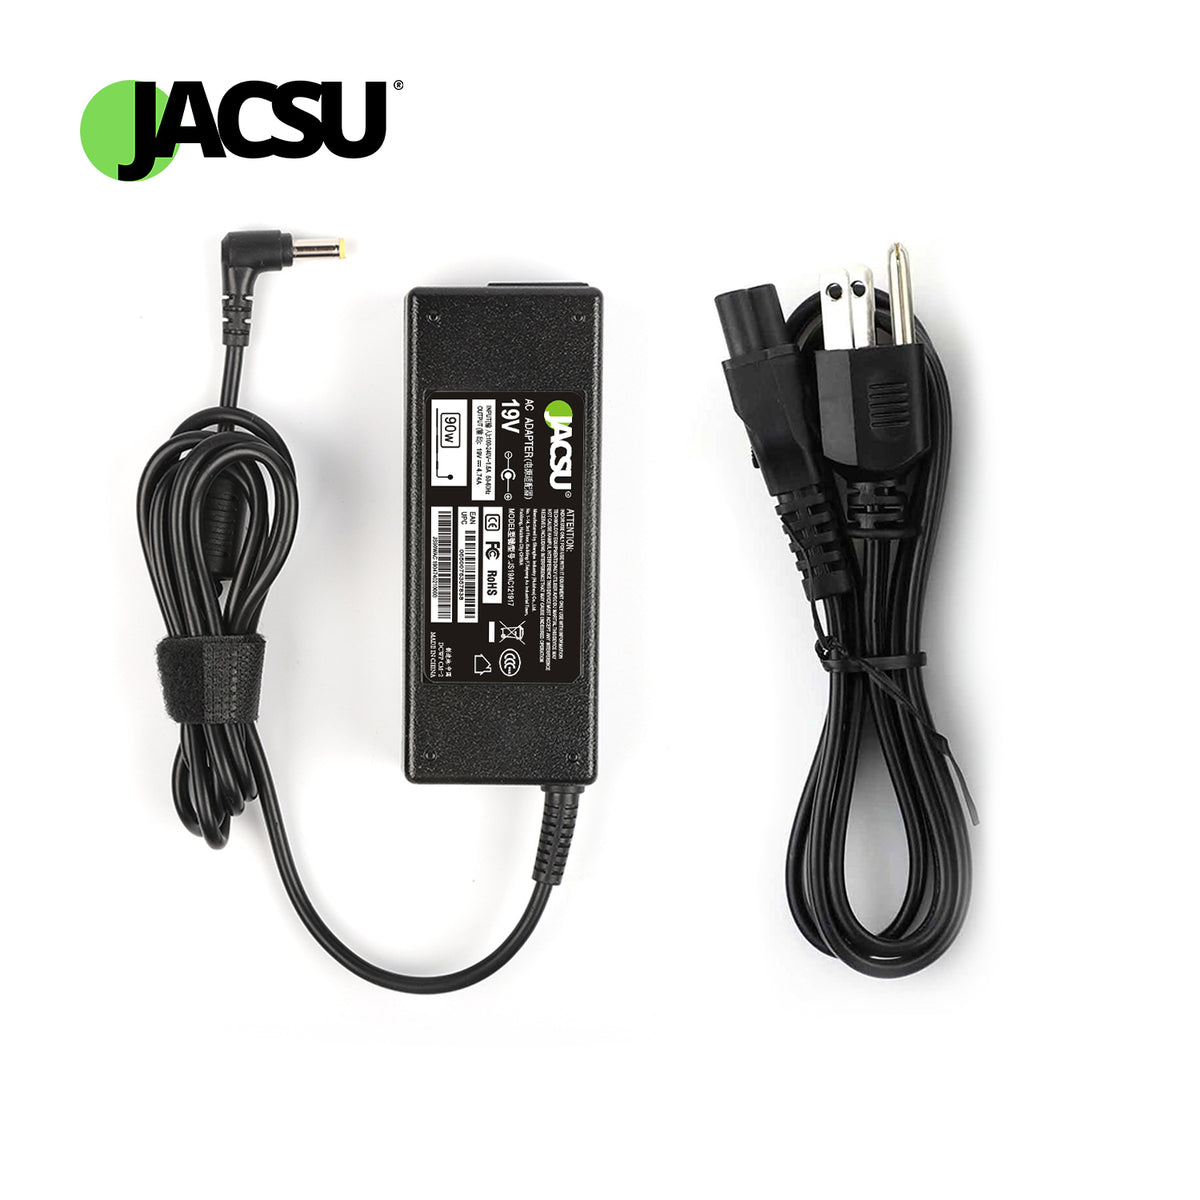 Jacsu 19V 4.74A 90W 5.5x1.7mm Laptop AC Adapter Charger For ACER ASPIRE 5750G 5755G 7110 9300 Notebook